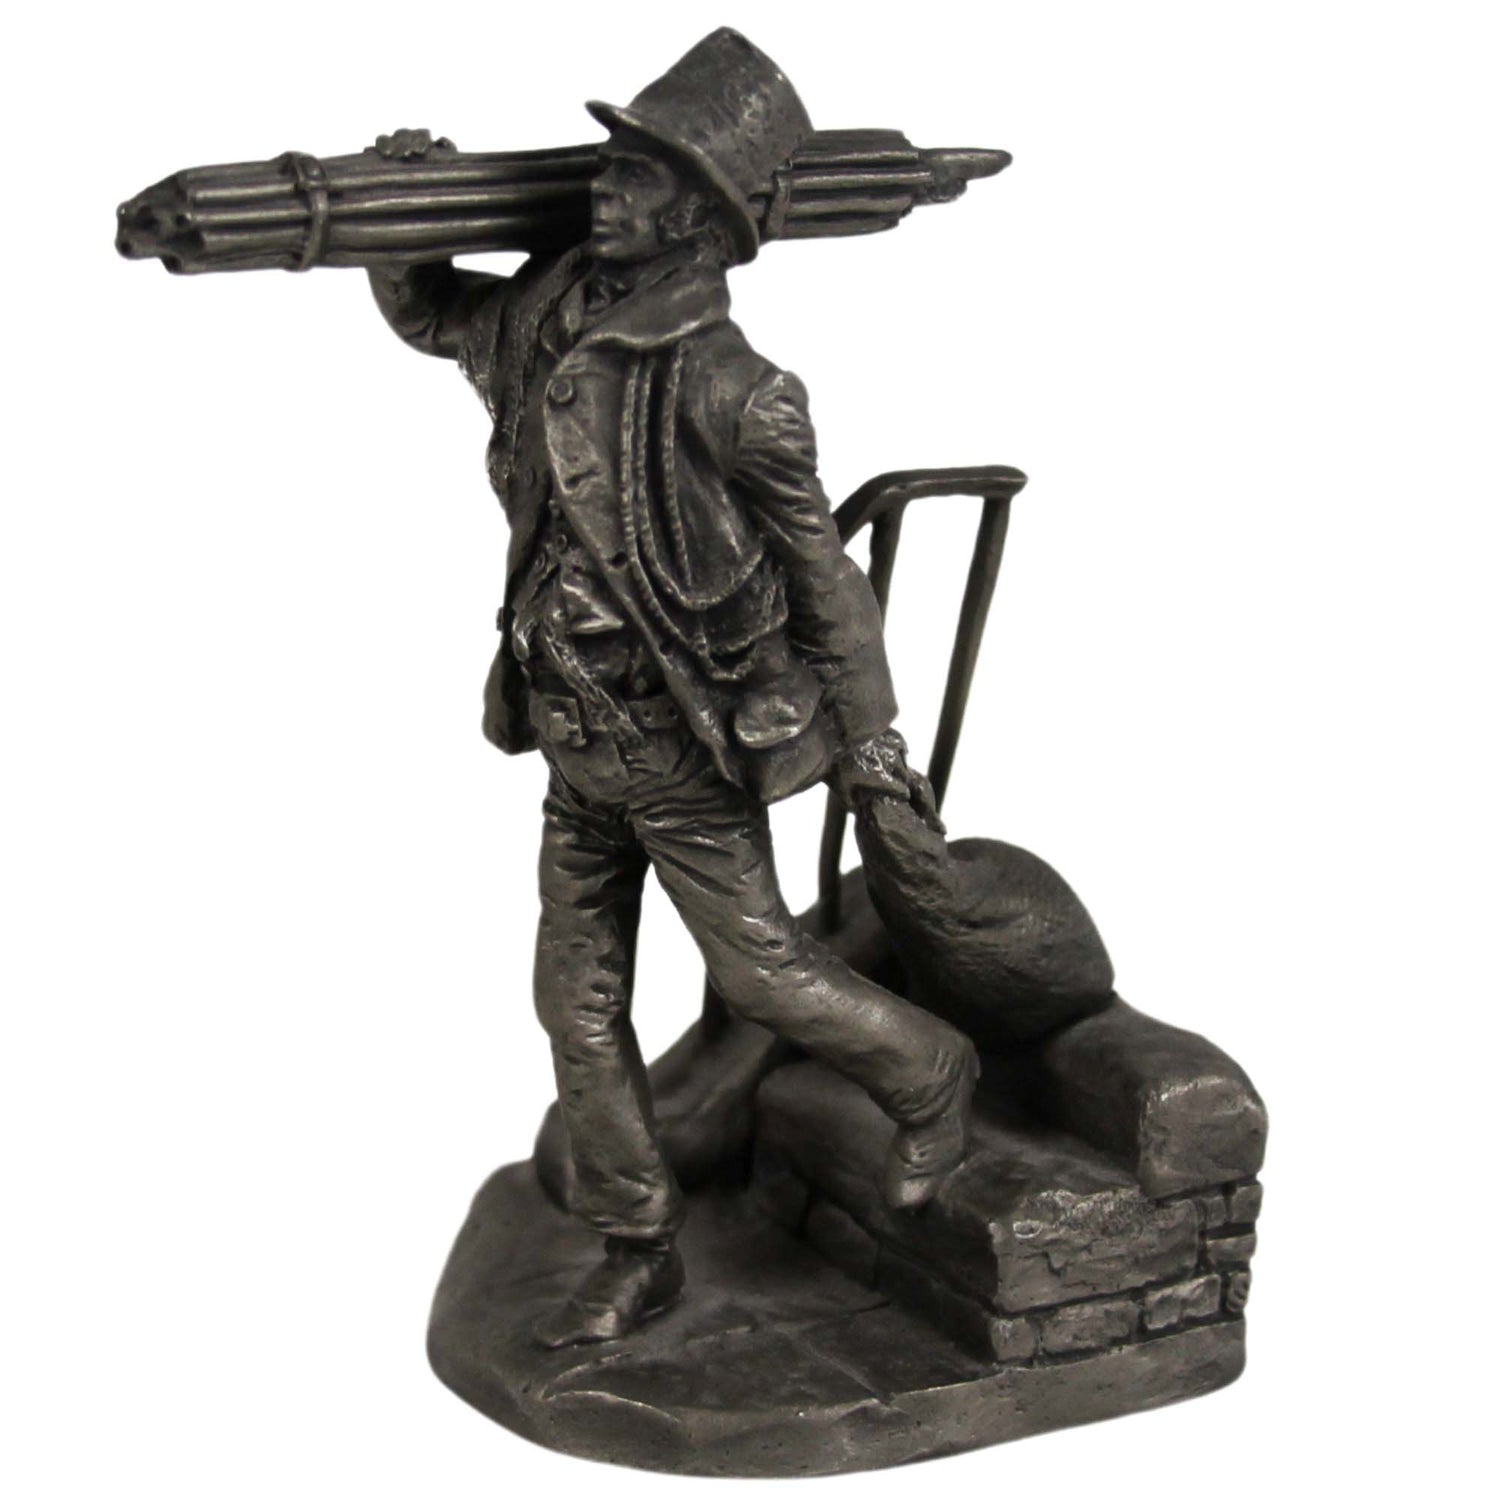 1977 Franklin Mint The Chimney Sweep Statue Right